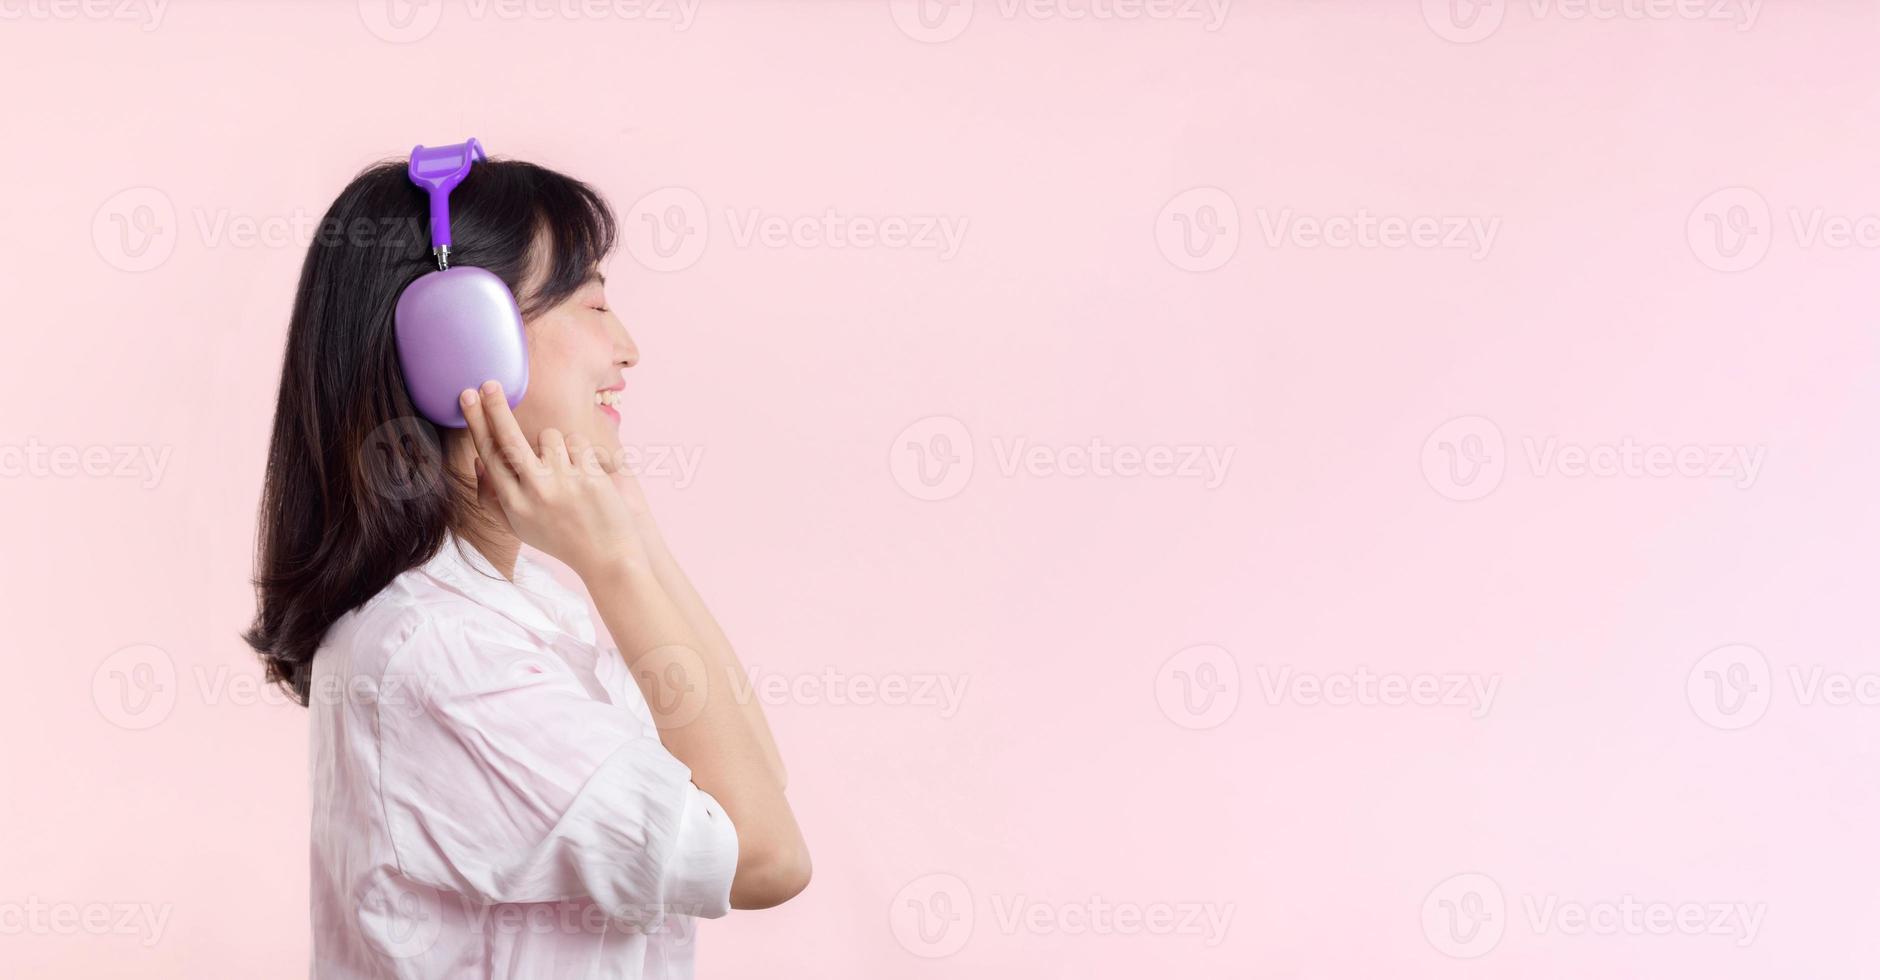 Side view young smiling cheerful fun woman she wear pink shirt white t-shirt headphones listen to music use mobile cell phone isolated on plain pastel light pink background. People lifestyle concept. photo